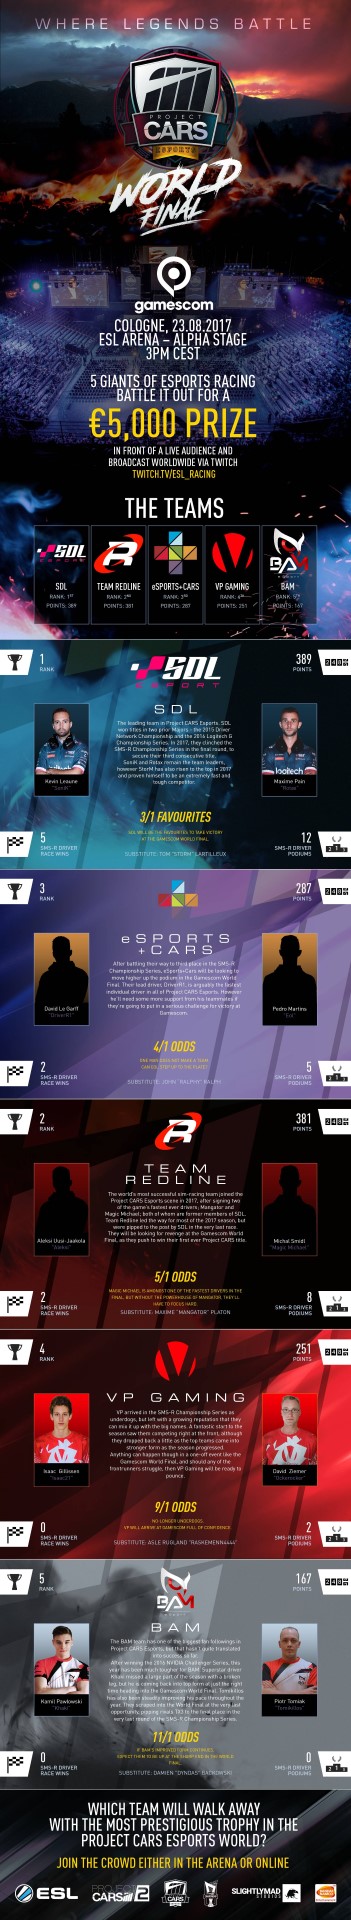 Project_CARS_Infographic_ESPORTS_1503047882